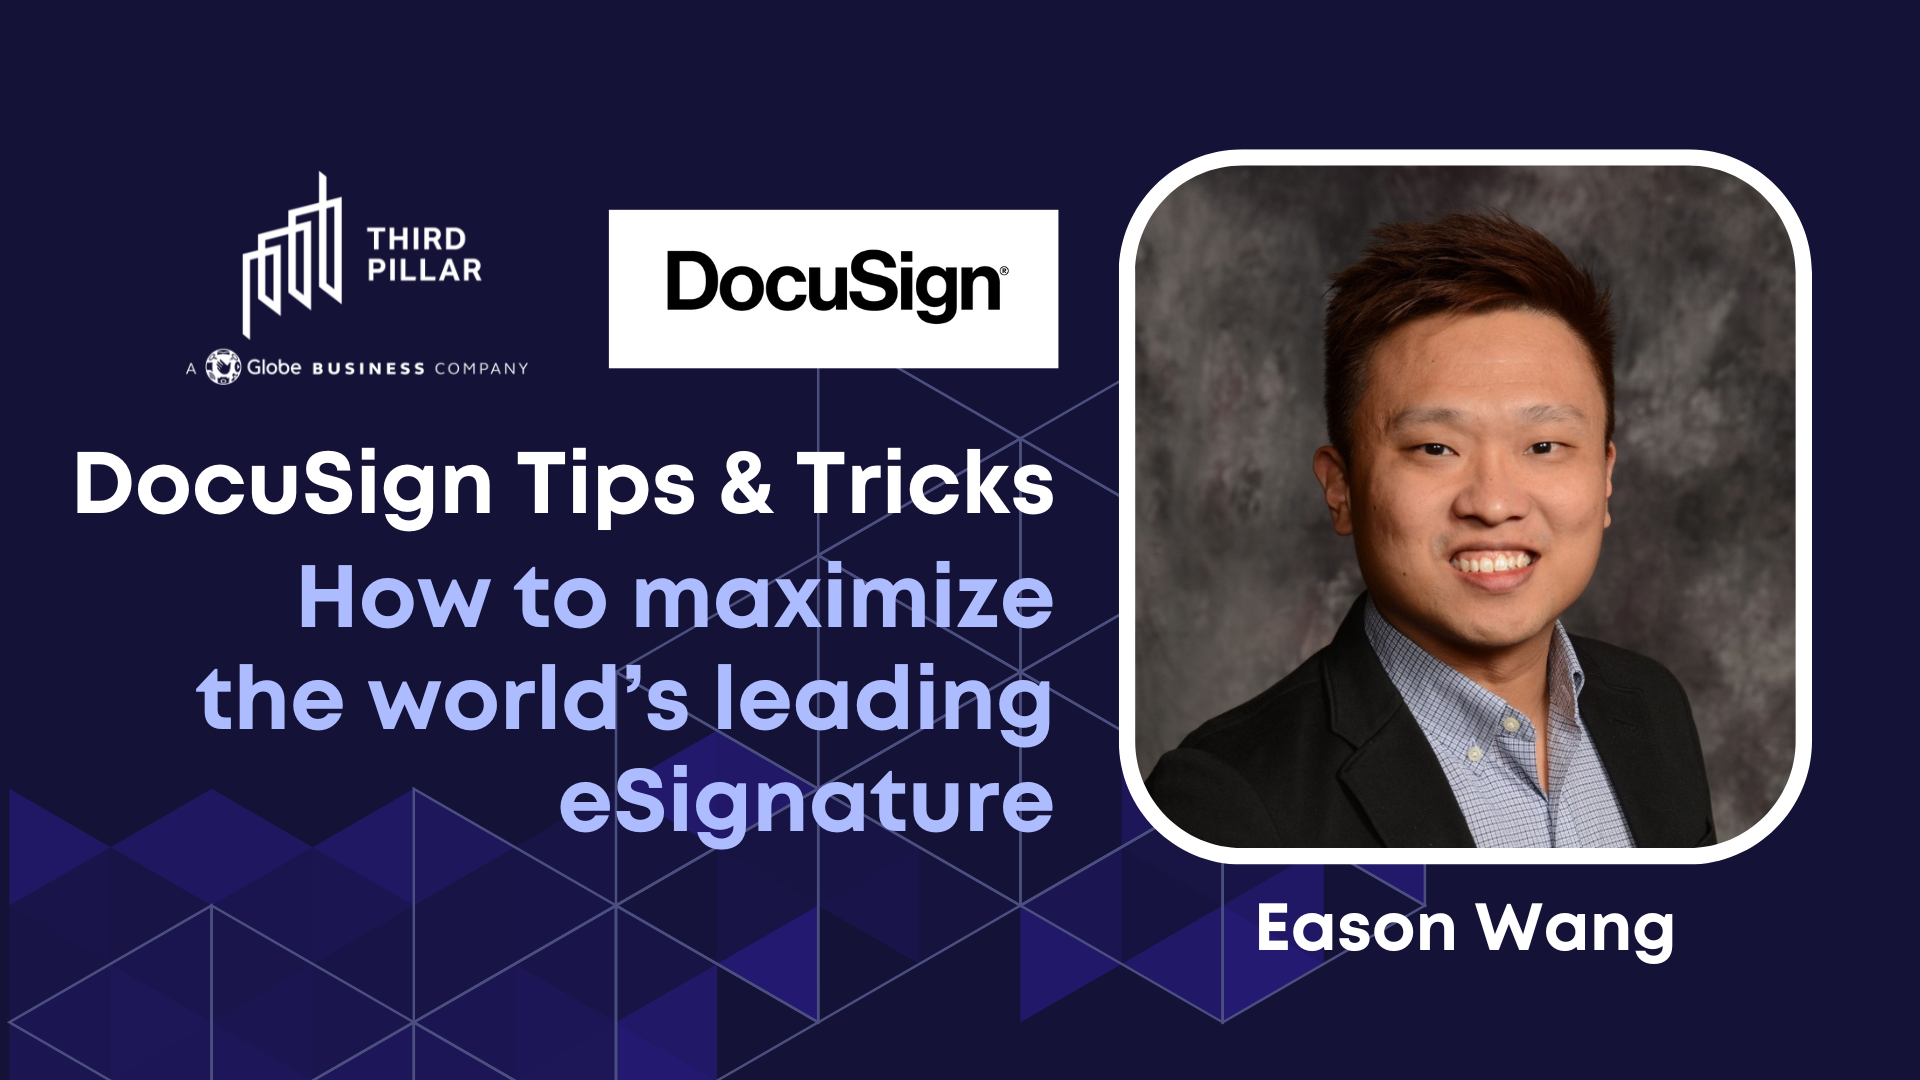 Docusign tips and tricks thumbnail